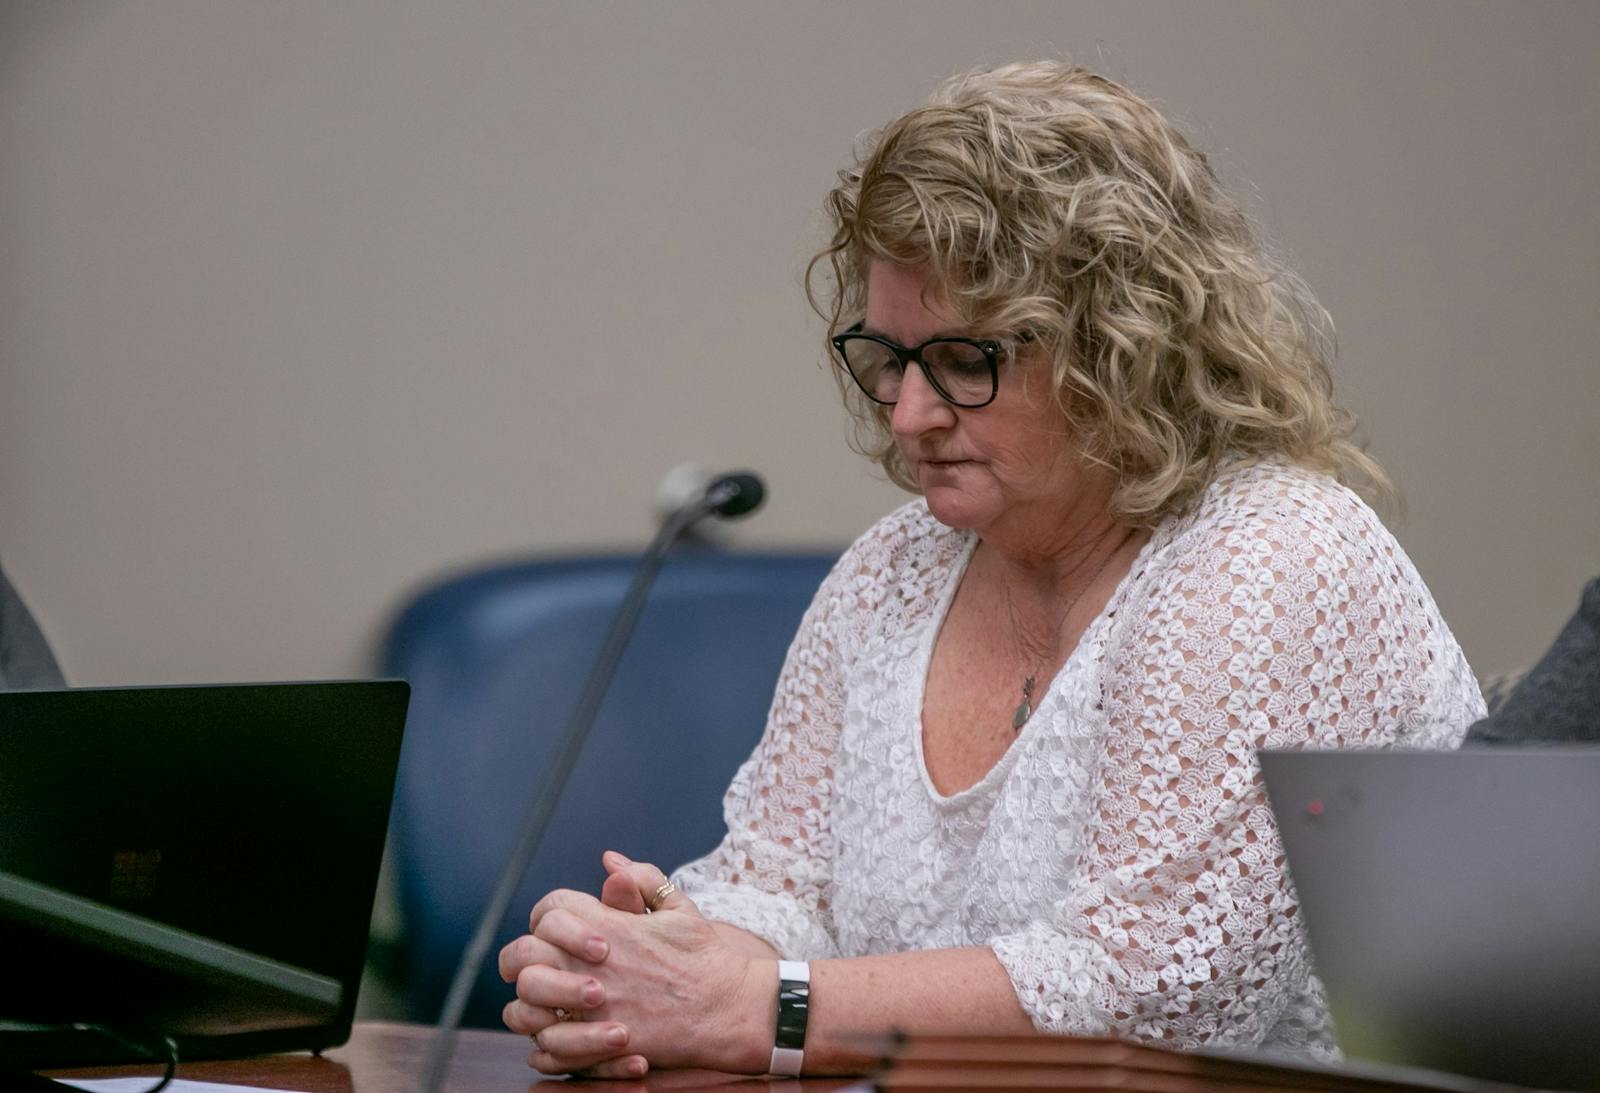 Ex Msu Gymnastics Coach Kathie Klages Released Early From Probation The State News 